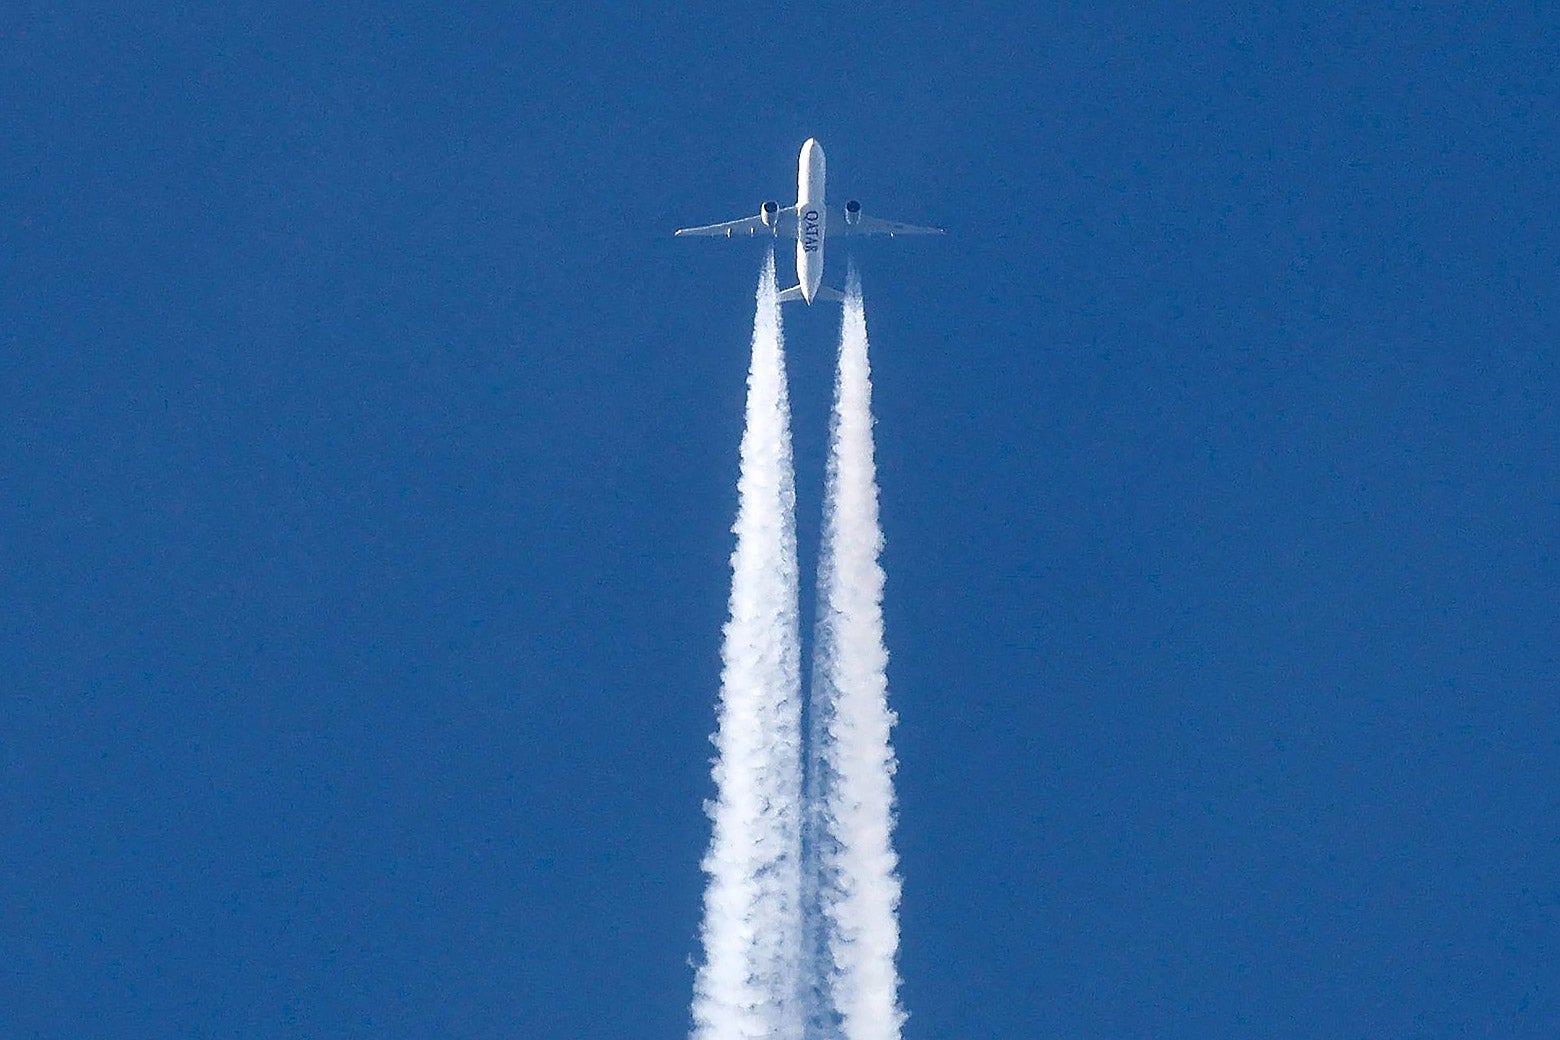 An aircraft in a blue sky, with a long line of contrails behind it. 